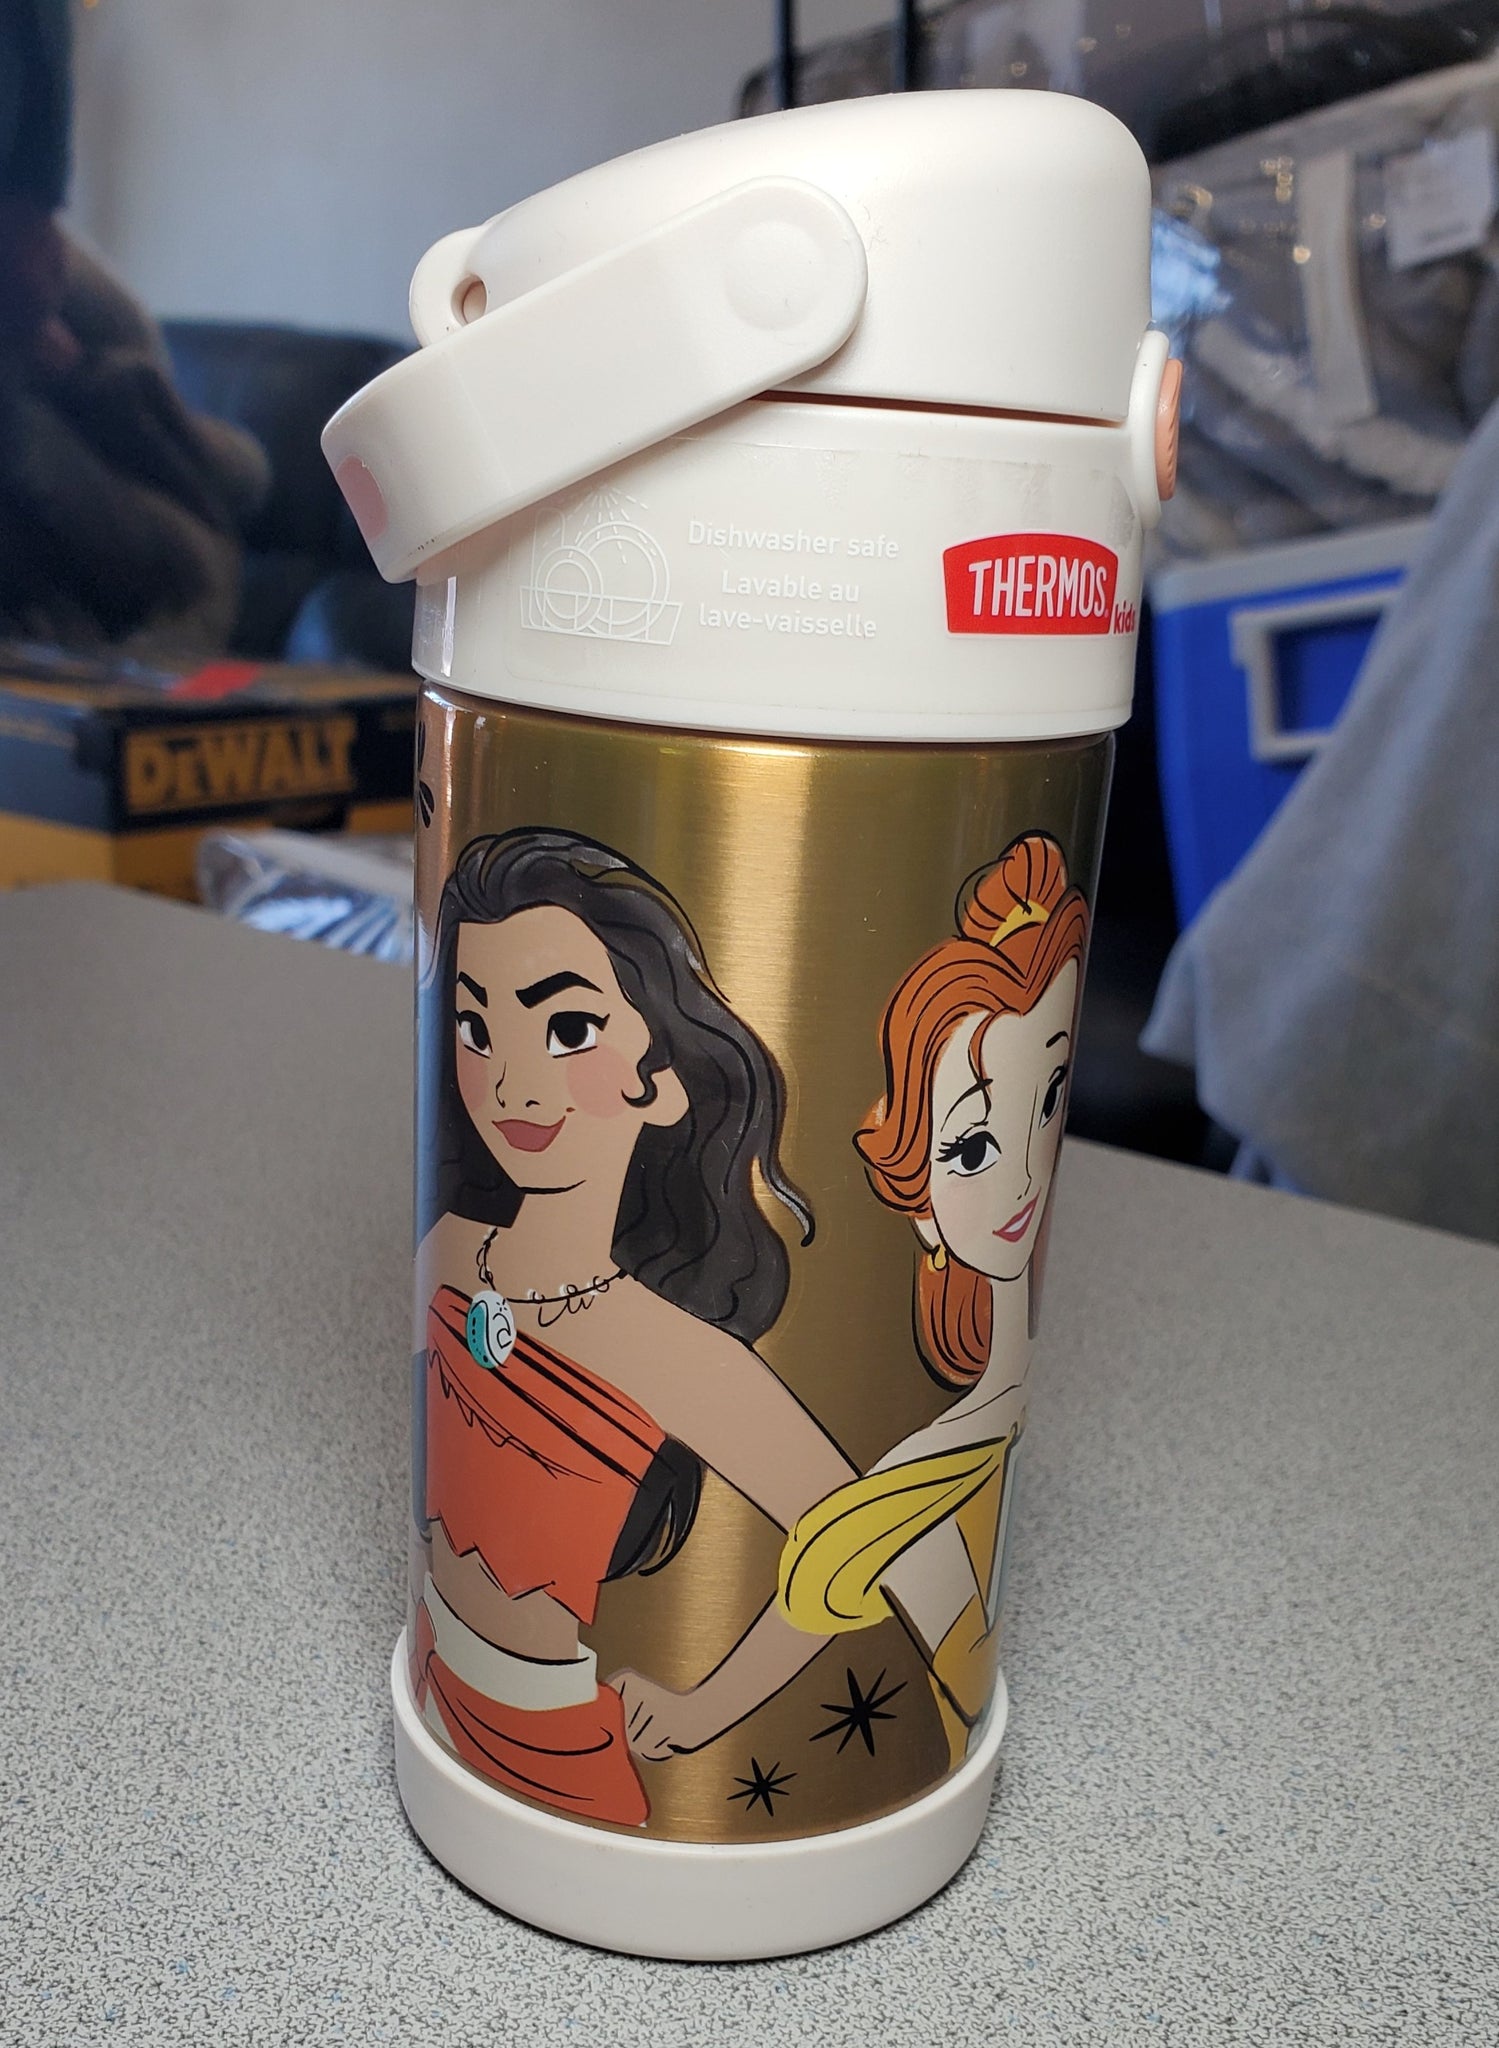 Thermos Vacuum Insulated Stainless Steel 12 Ounce Funtainer with Straw -  Disney Princess 